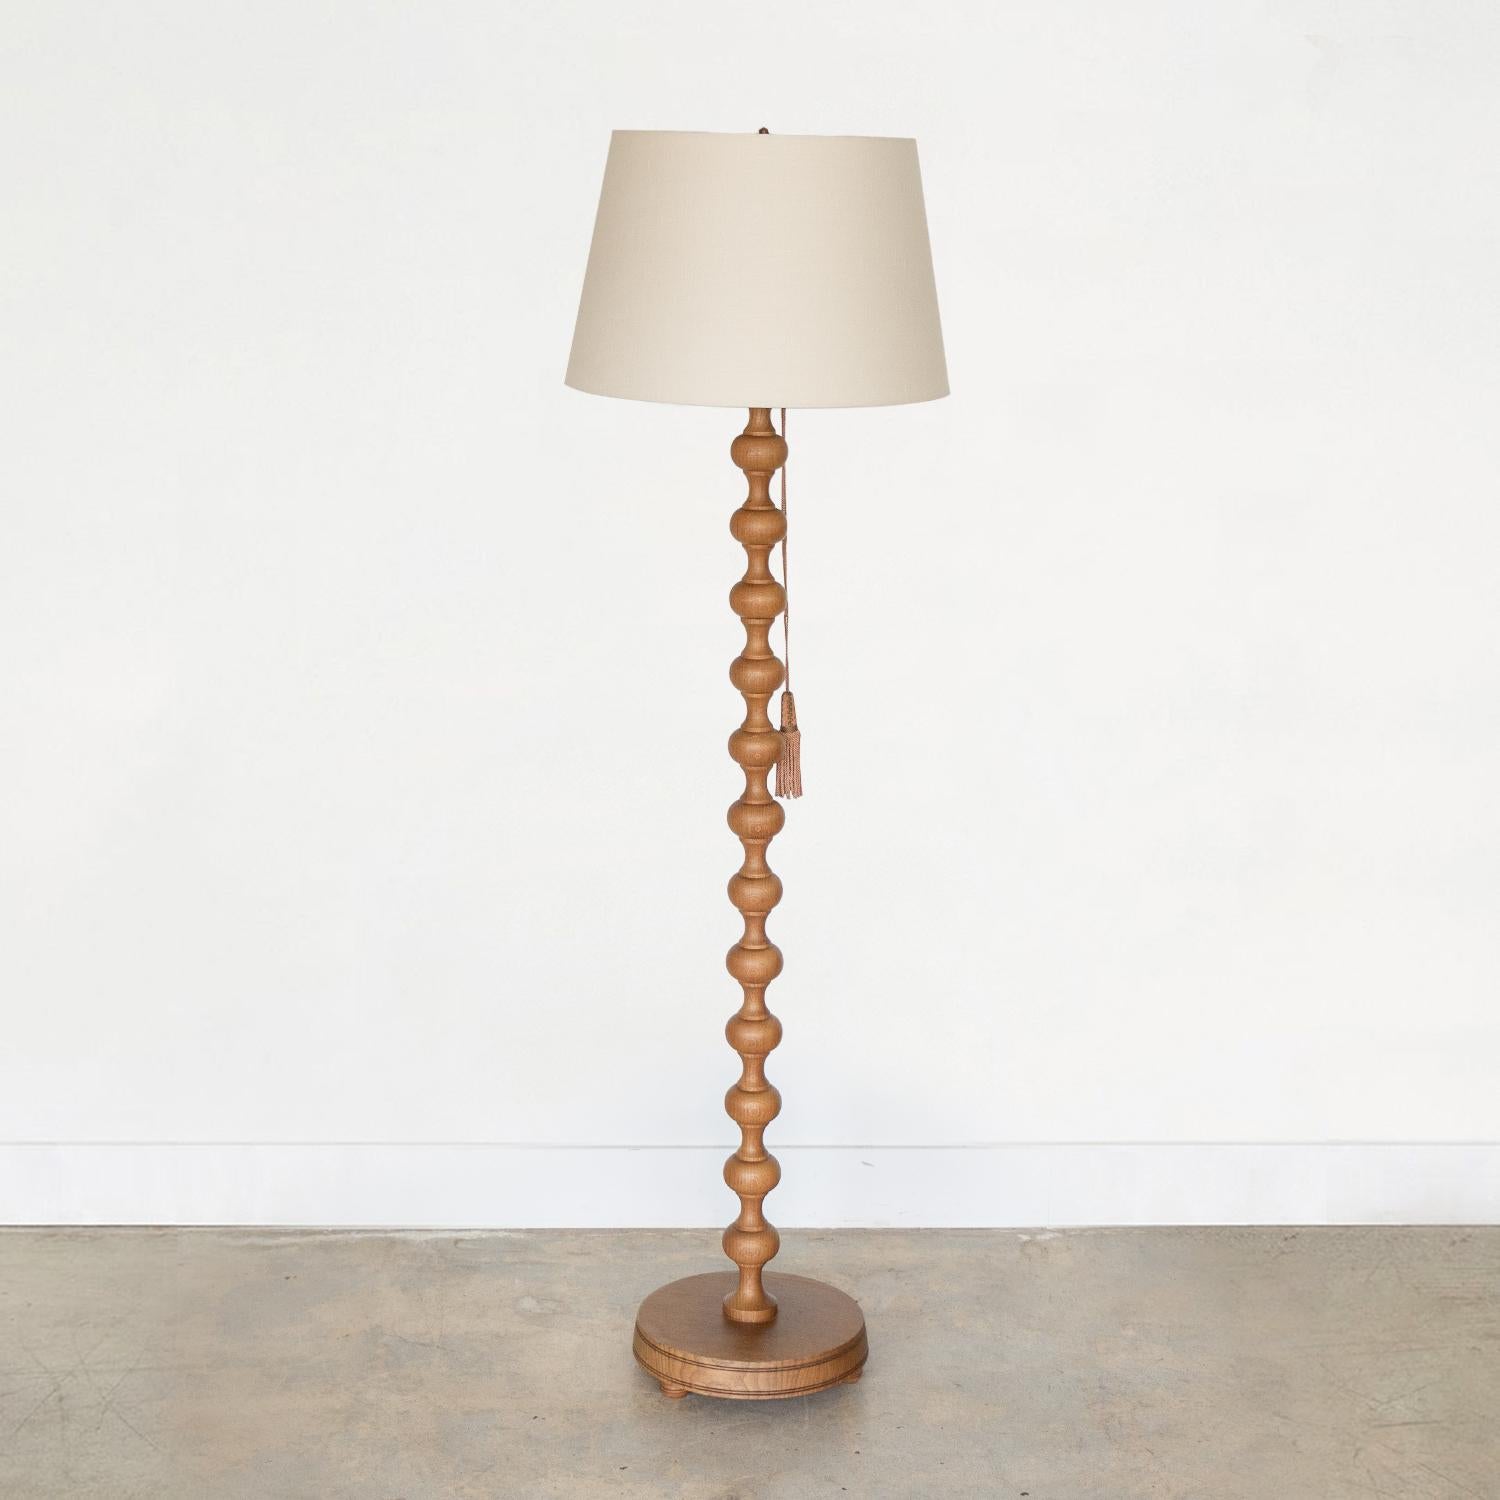 Beautiful carved bobbin wood floor lamp from France, 1940's. Great light wood finish and original velvet pull tassel to turn light on and off. Newly re-wired and new linen shade.